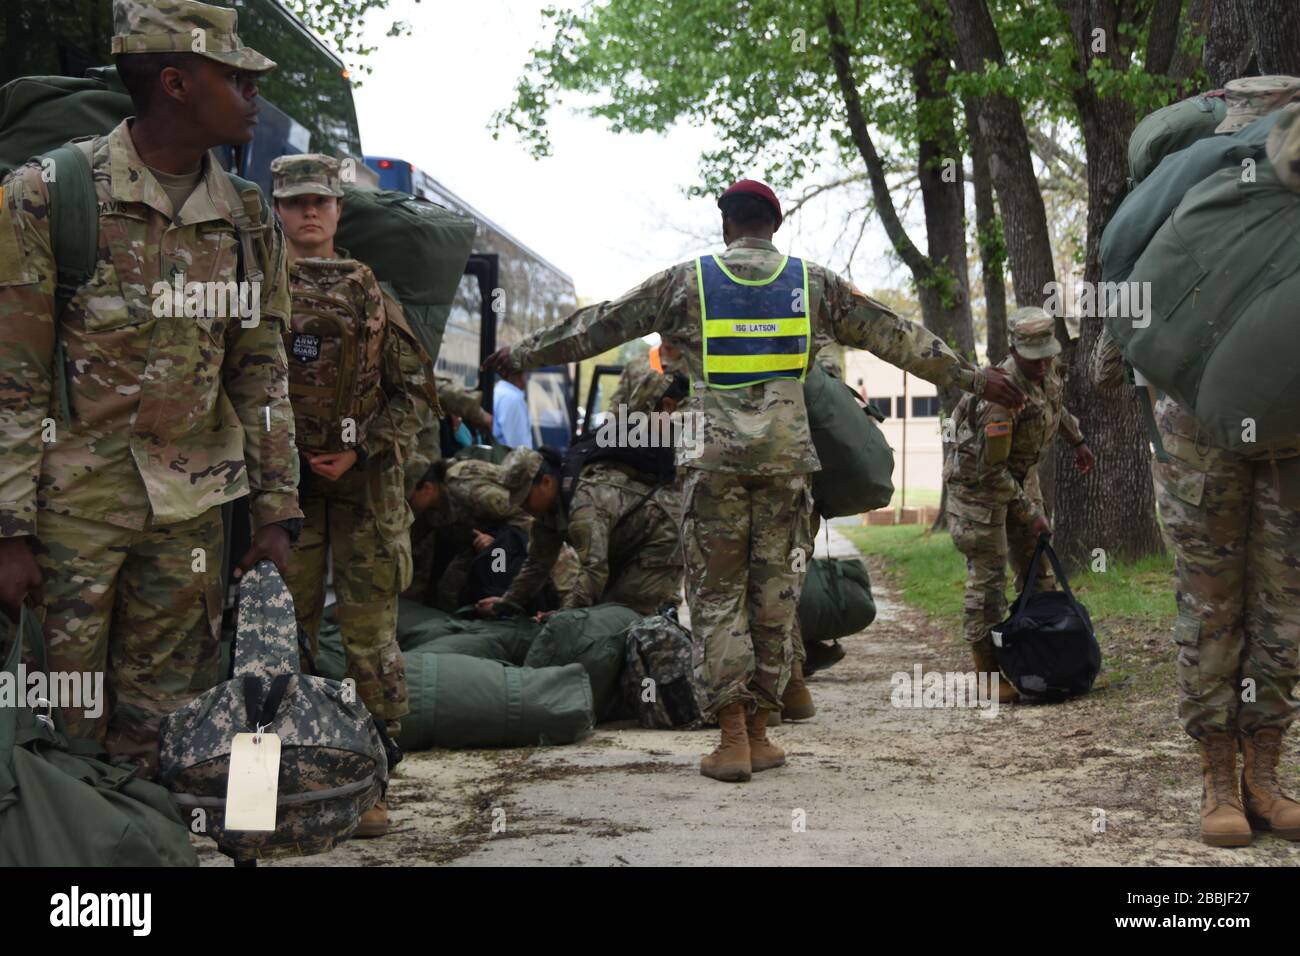 Fort Lee, United States of America. 31 March, 2020. U.S. Army soldiers are separated at a safe distance during the first movement of troops since restrictions implemented by the Department of Defense to prevent the spread of COVID-19, coronavirus March 31, 2020 in Fort Lee, Virginia. Credit: Crista Mary Mack/U.S. Army/Alamy Live News Stock Photo